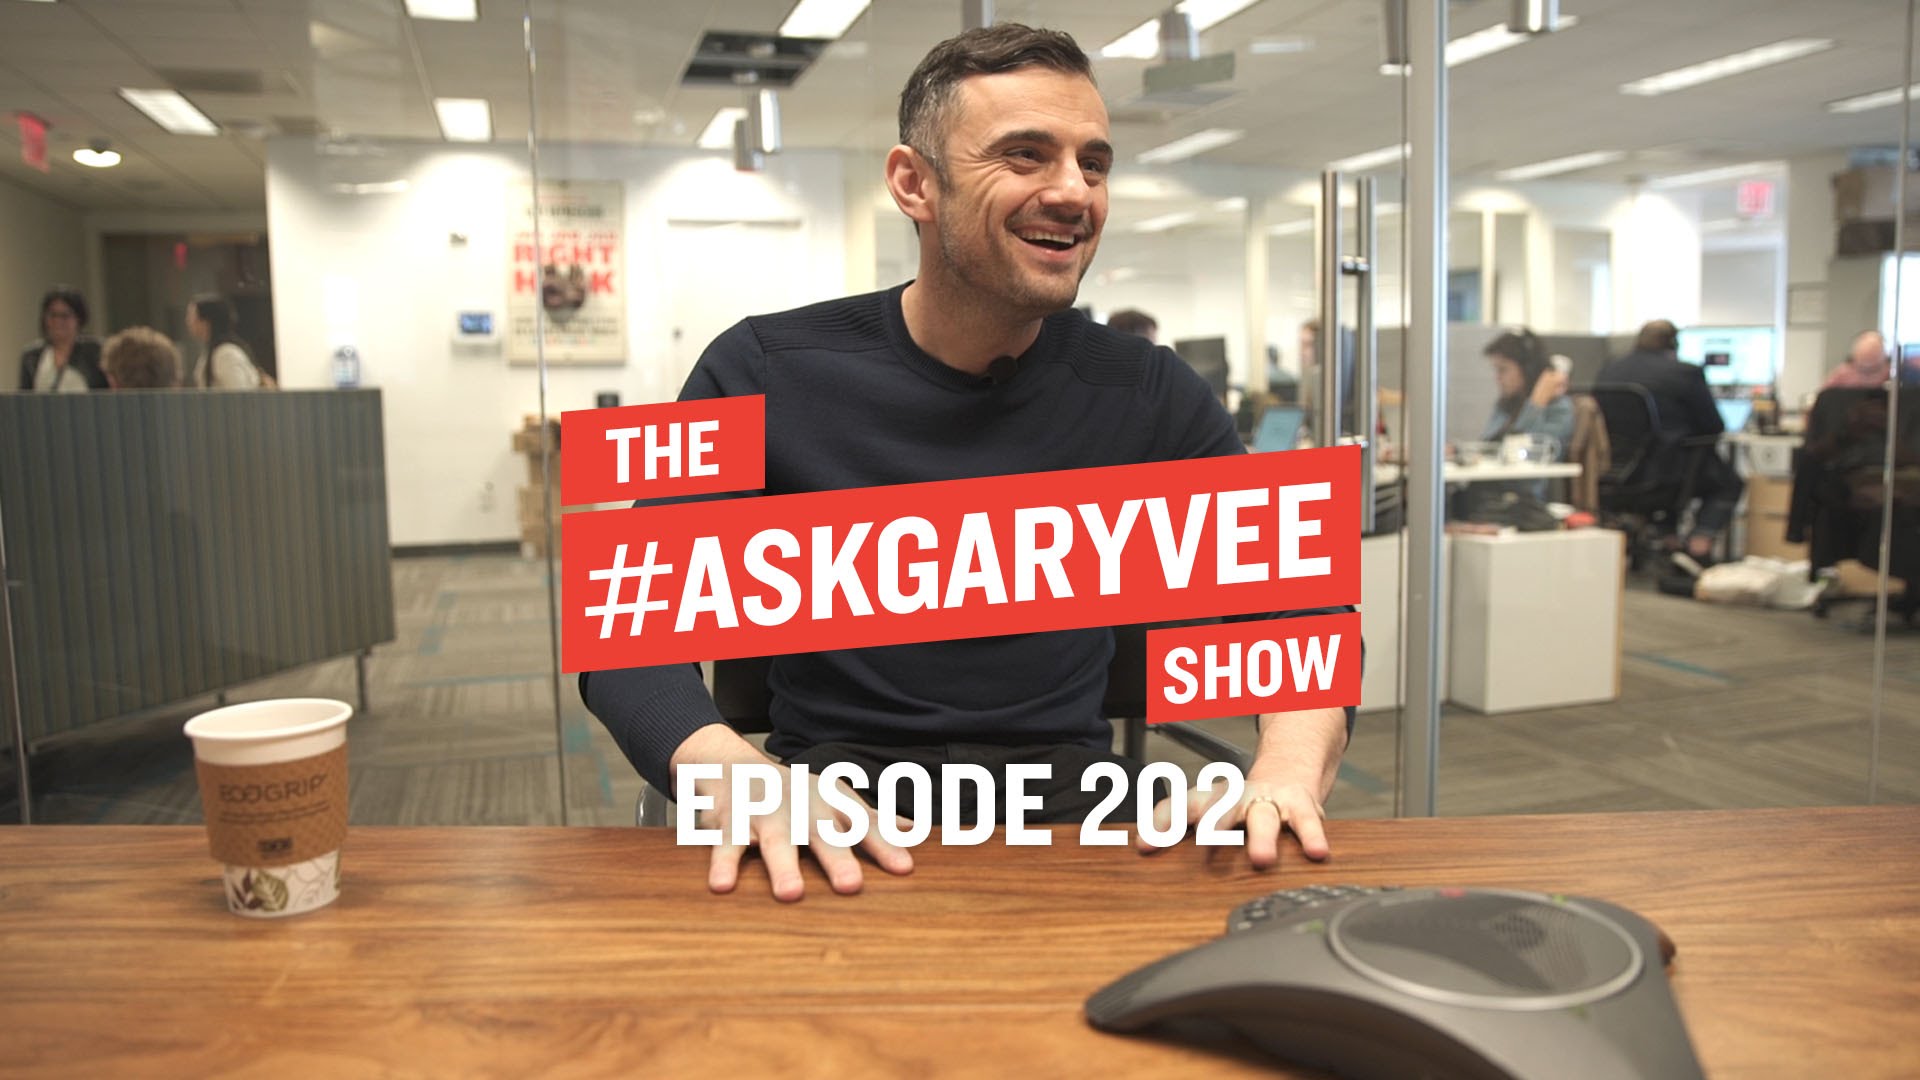 My Deput on the AskGaryVee Show!